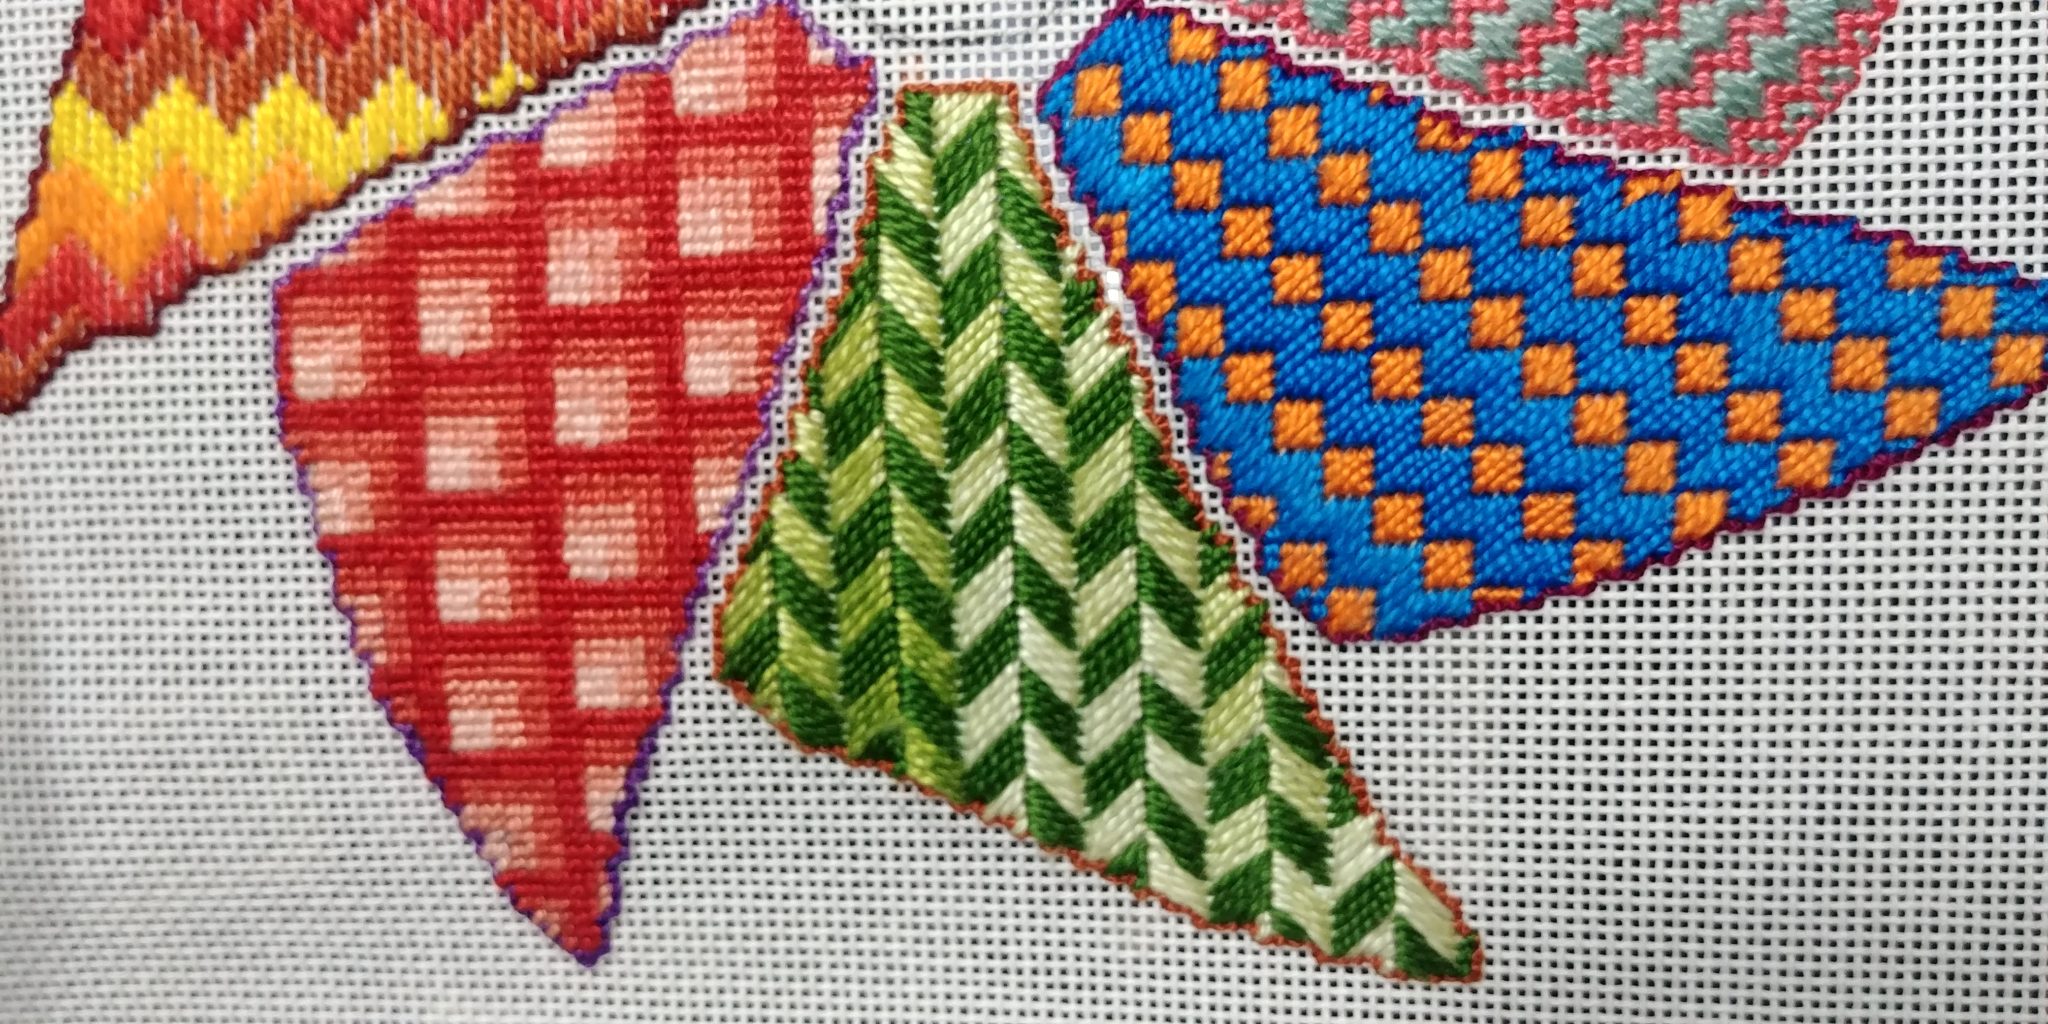 Needlepoint Canvas - A Quick Guide to Different Types - Magic Hour  Needlecrafts